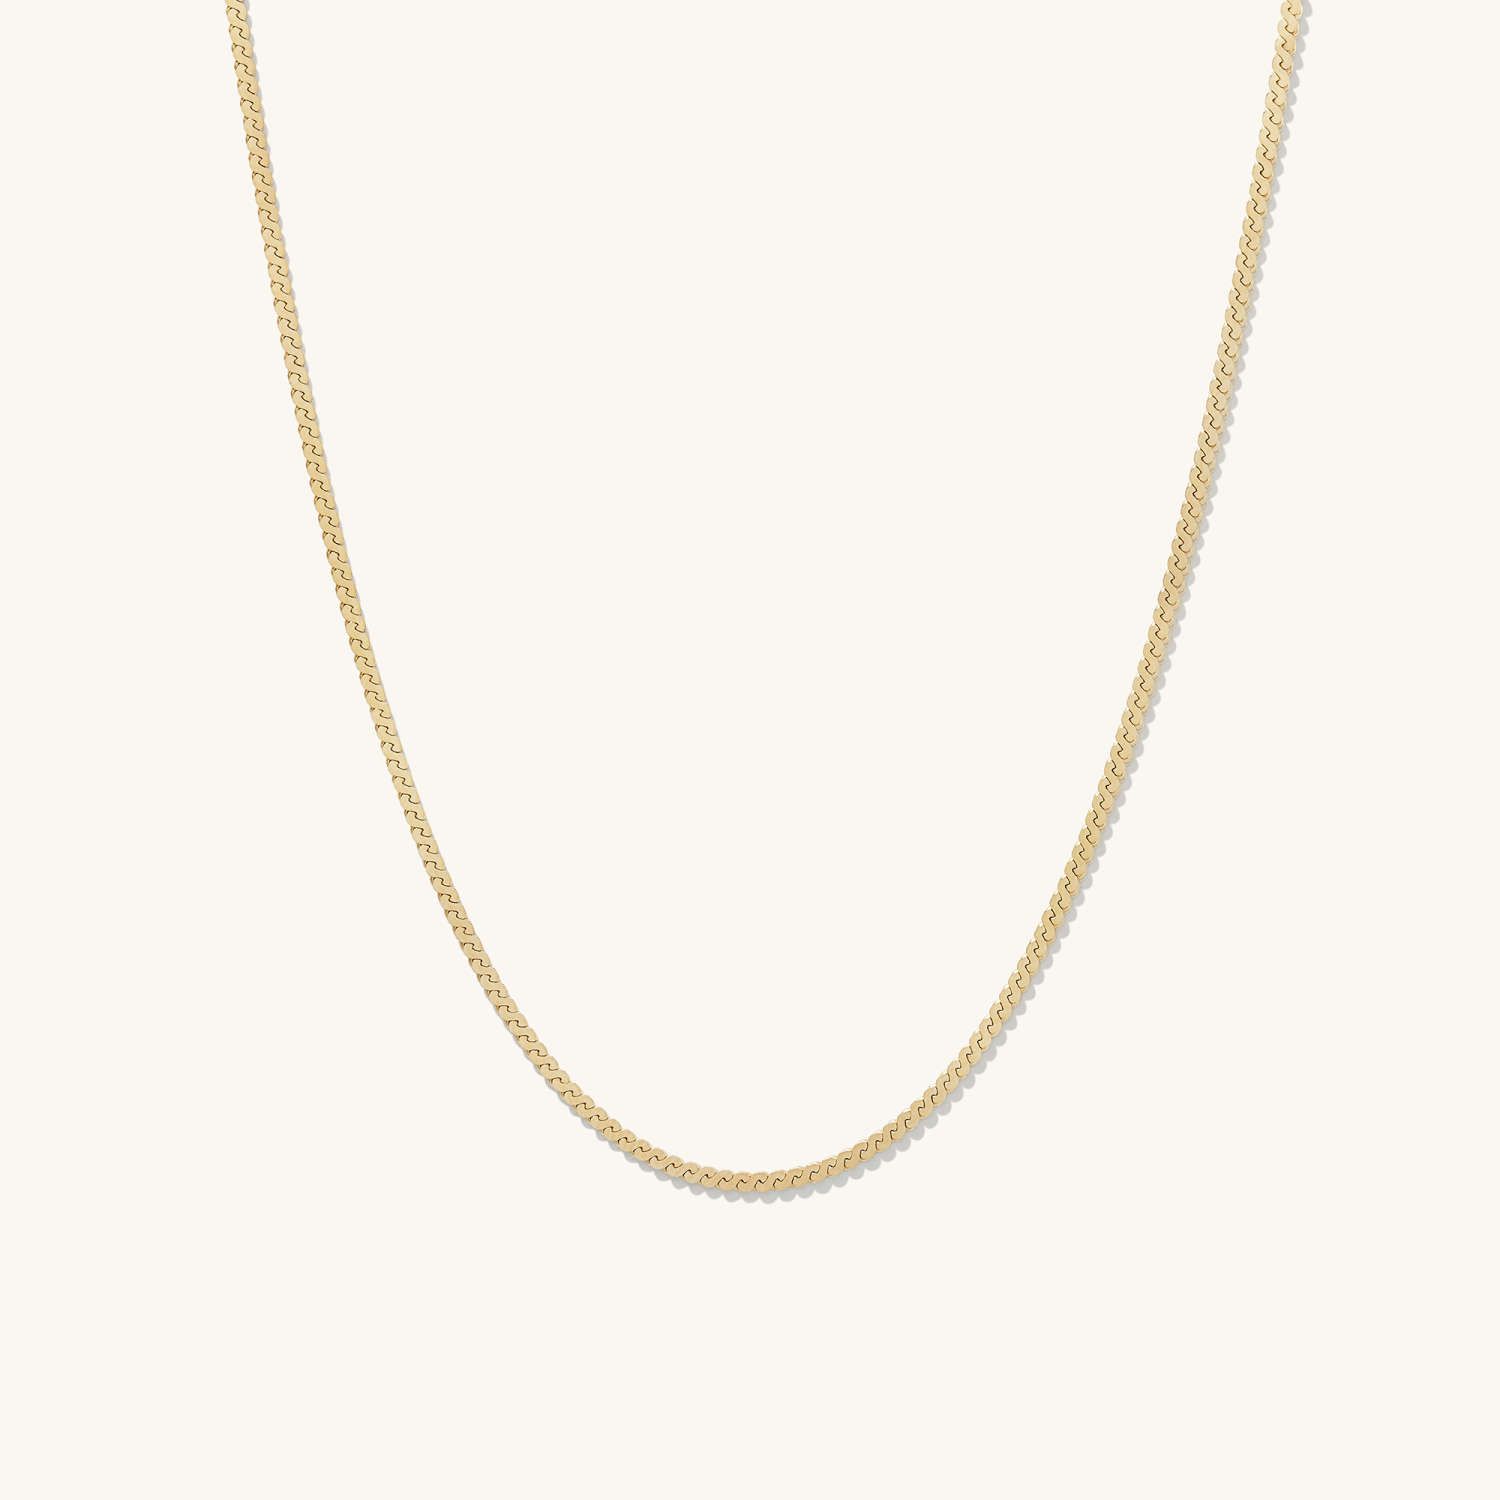 Serpentine Chain Necklace | Mejuri (Global)